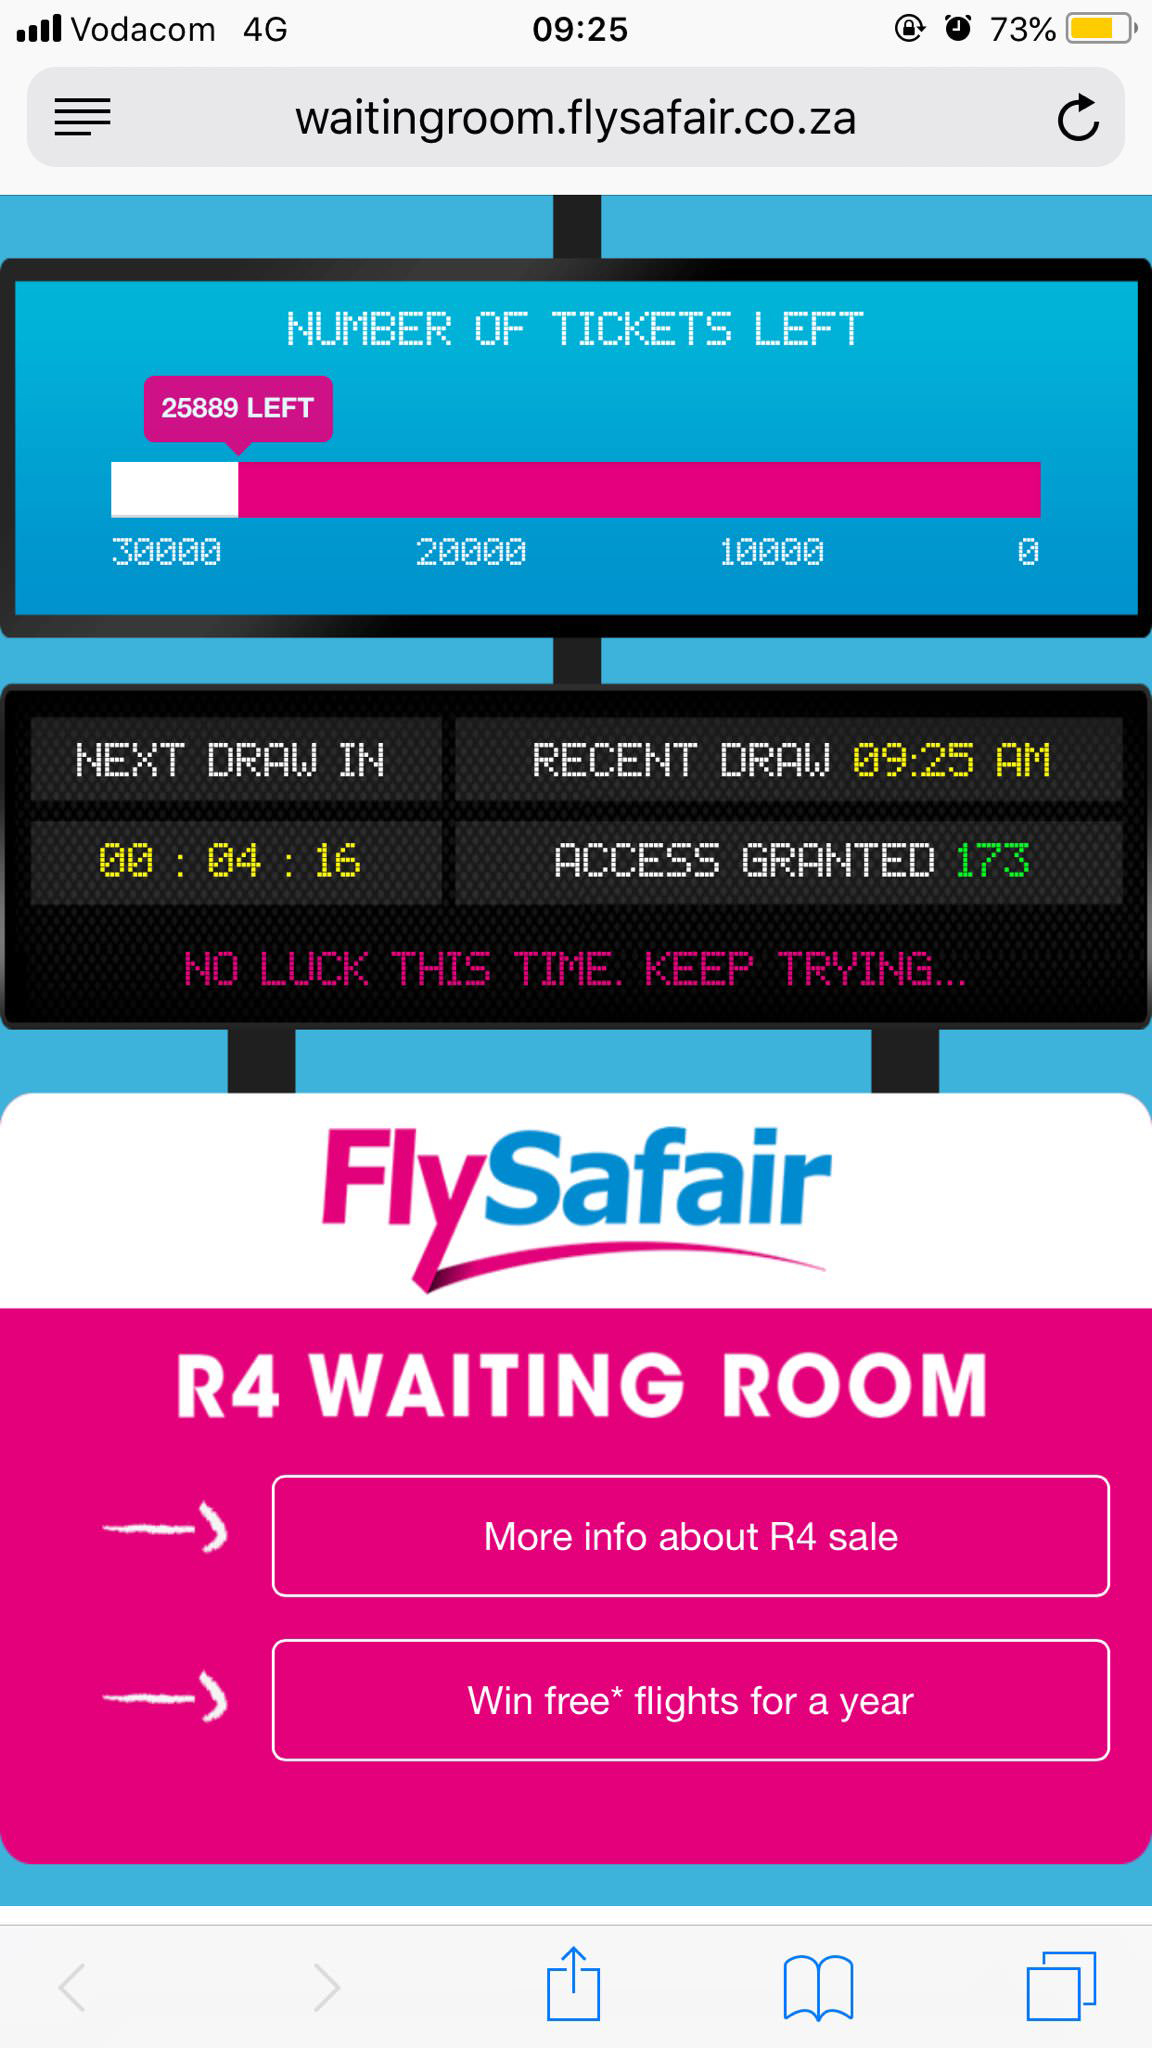 Mobile View of the FlySafair promotion